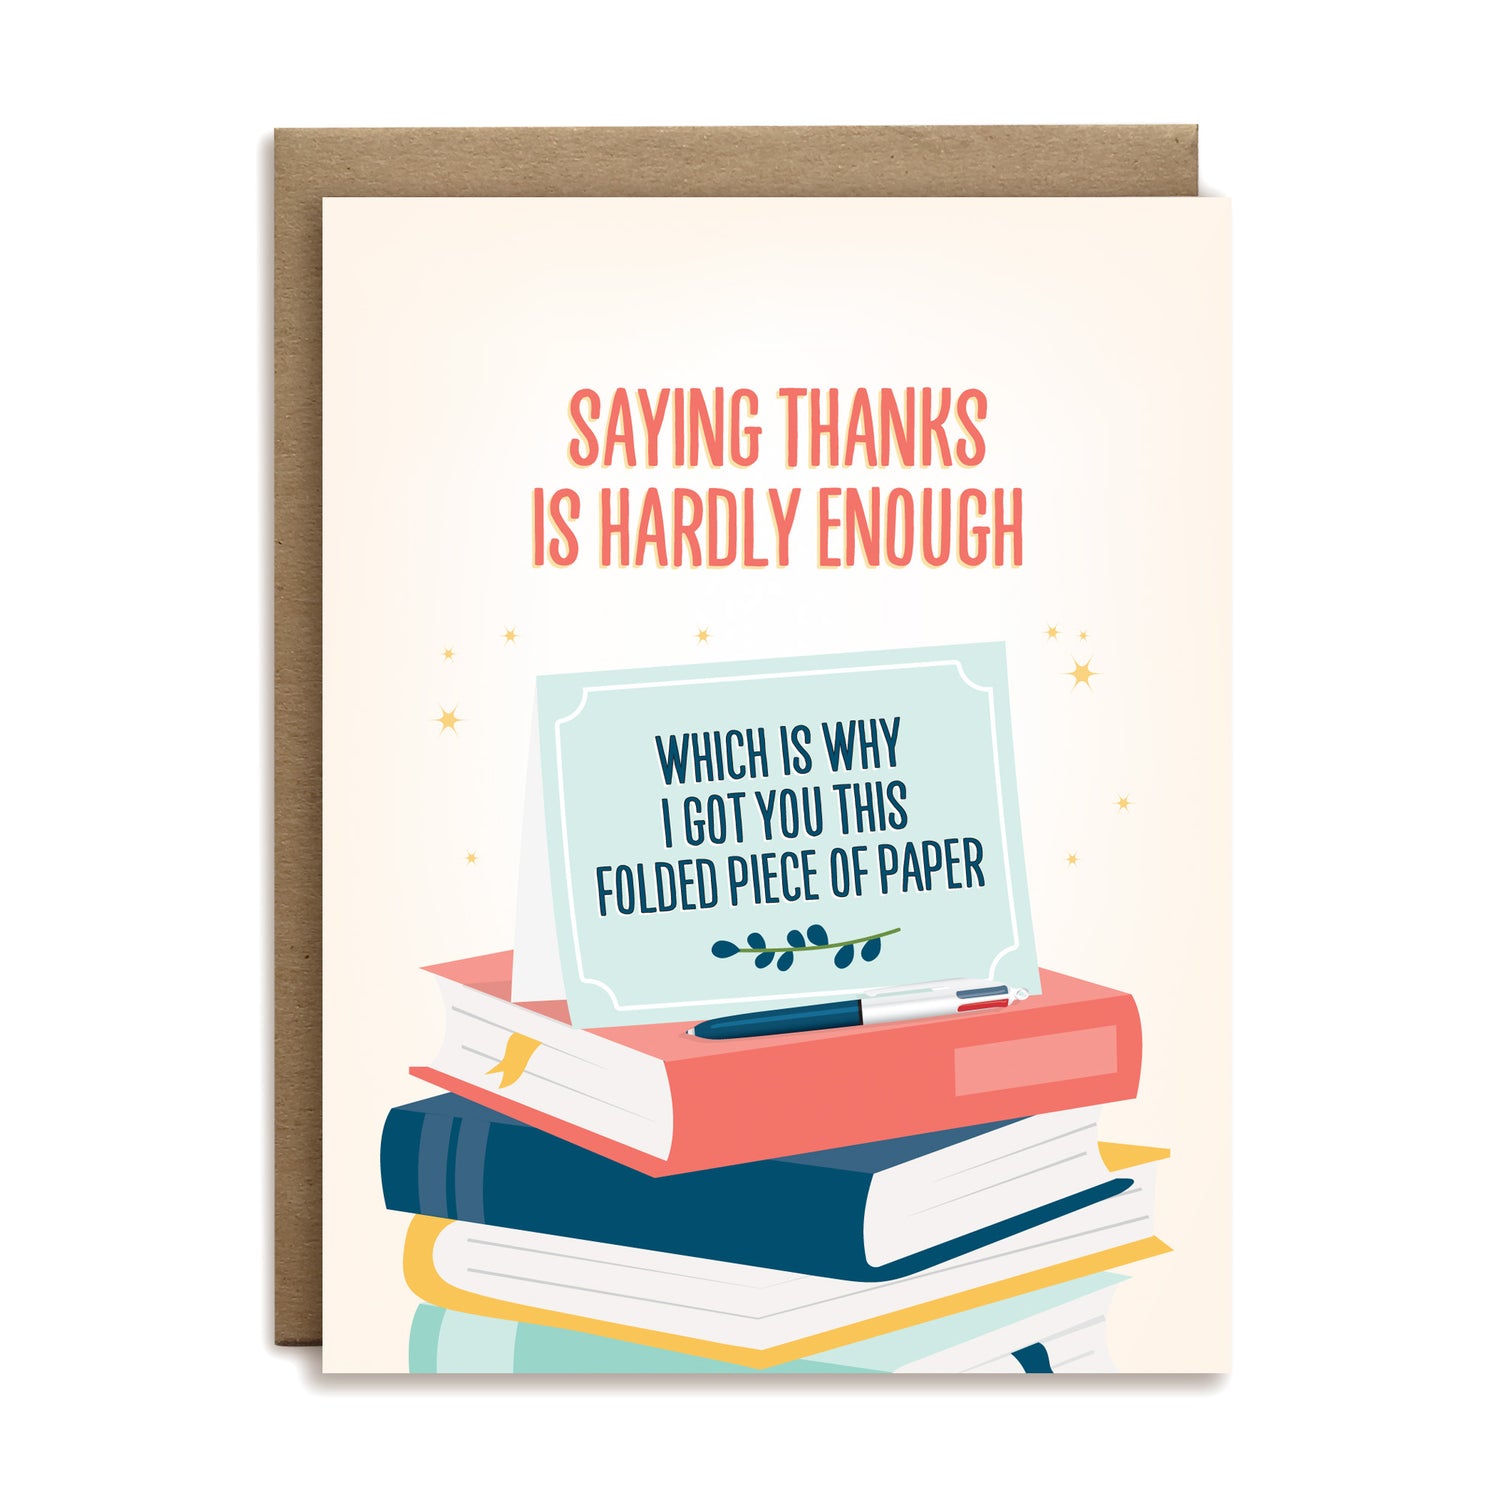 Saying thanks is hardy enough which is why I got your this folded piece of paper thank you greeting card by I&